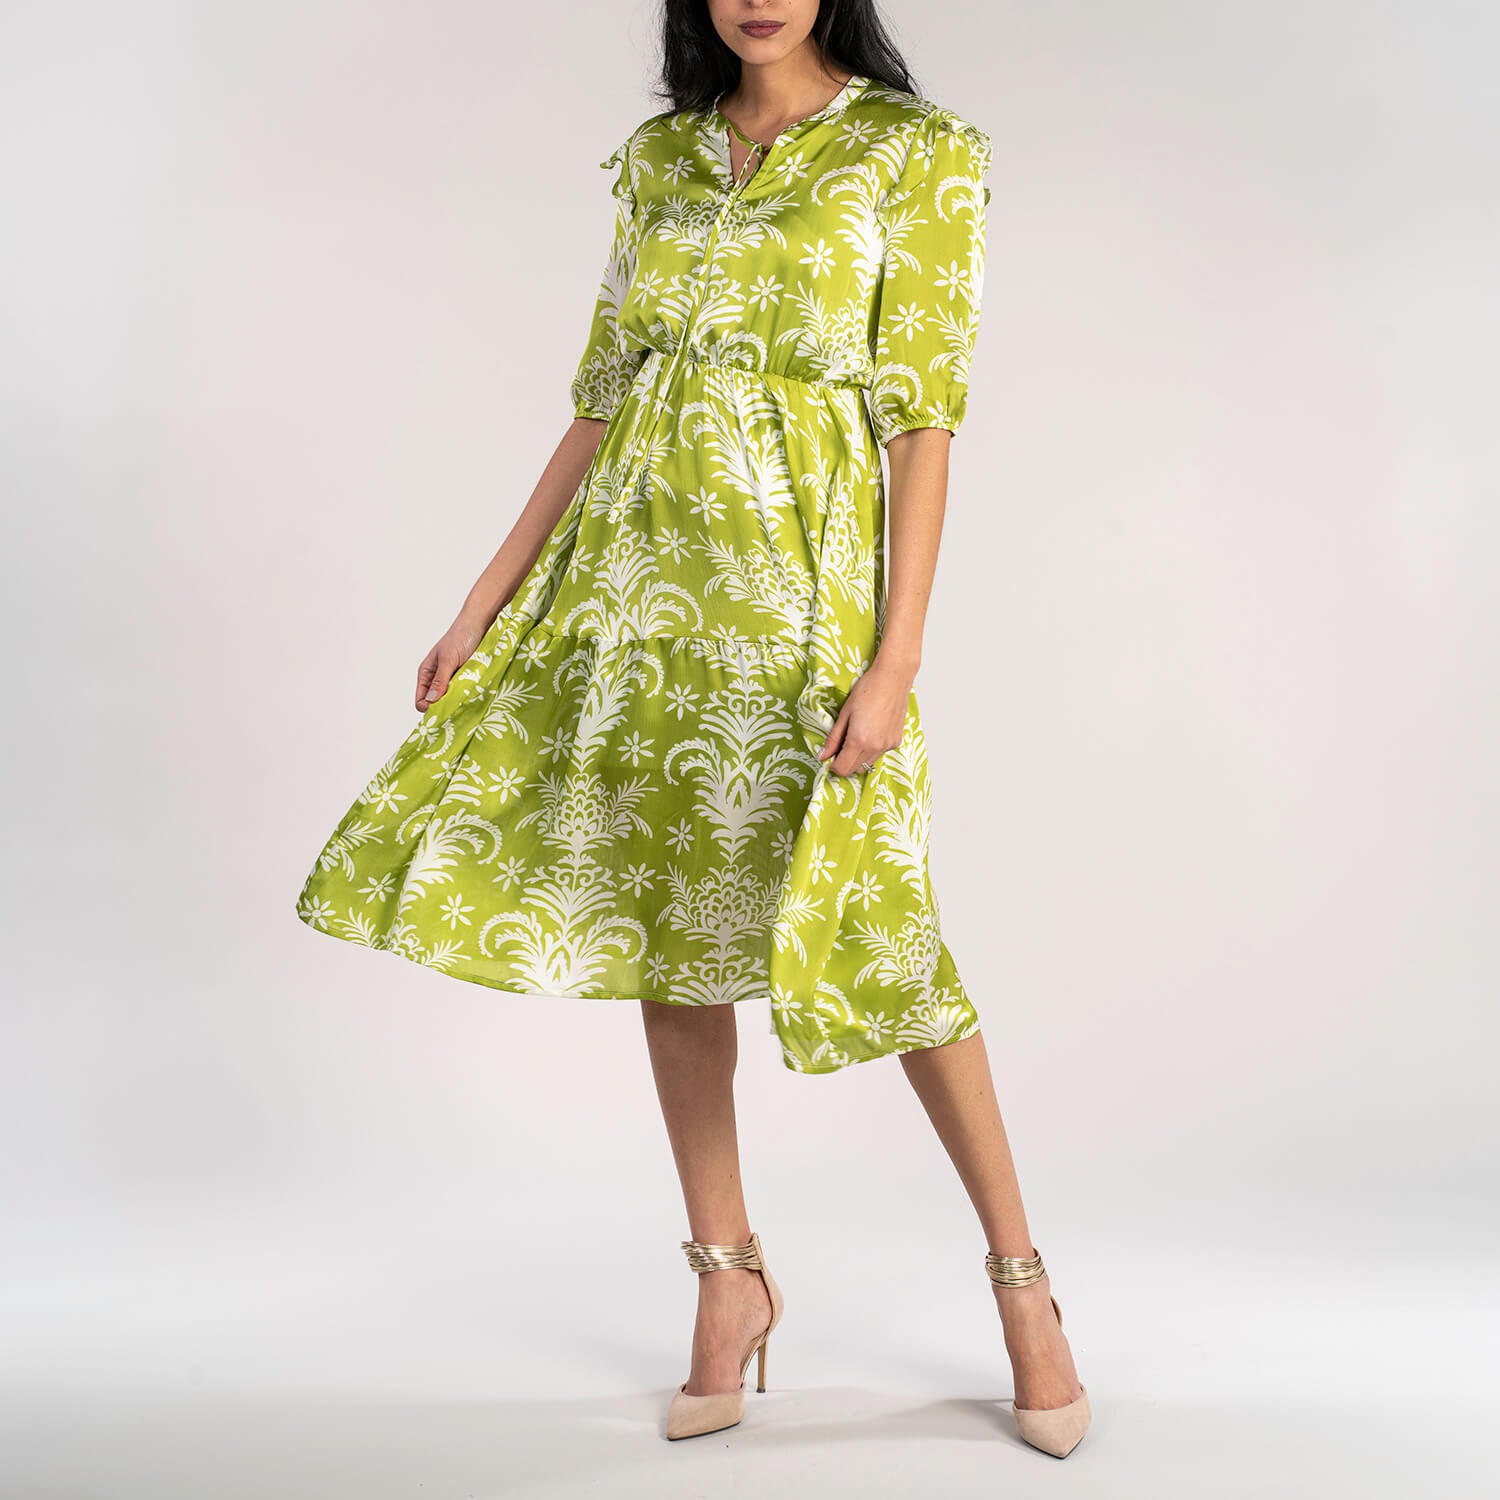 Naoise Nancy Dress - Lime 1 Shaws Department Stores